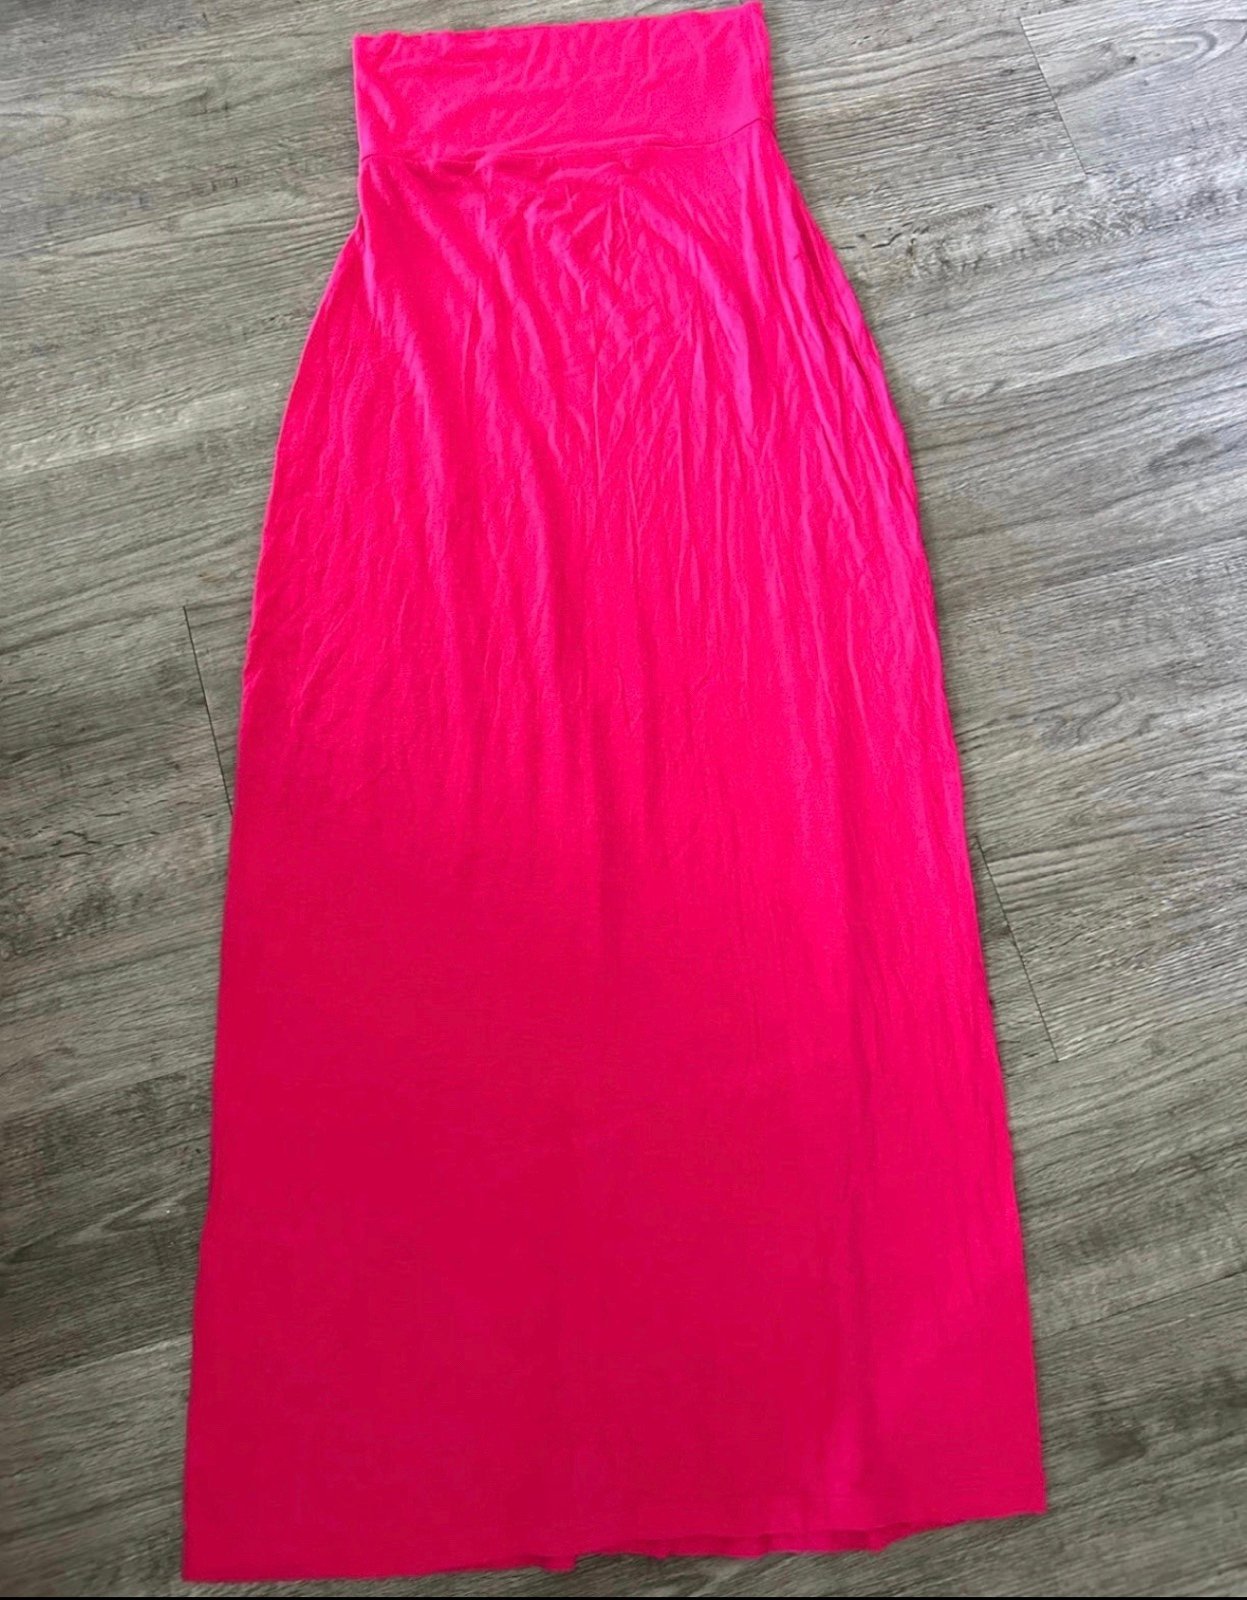 Perfect HOT PINK ARIZONA WOMEN SKIRT LOUNGE CASUAL MAXI SUMMER FASHION S SMALL pLvuDXSZ1 just for you